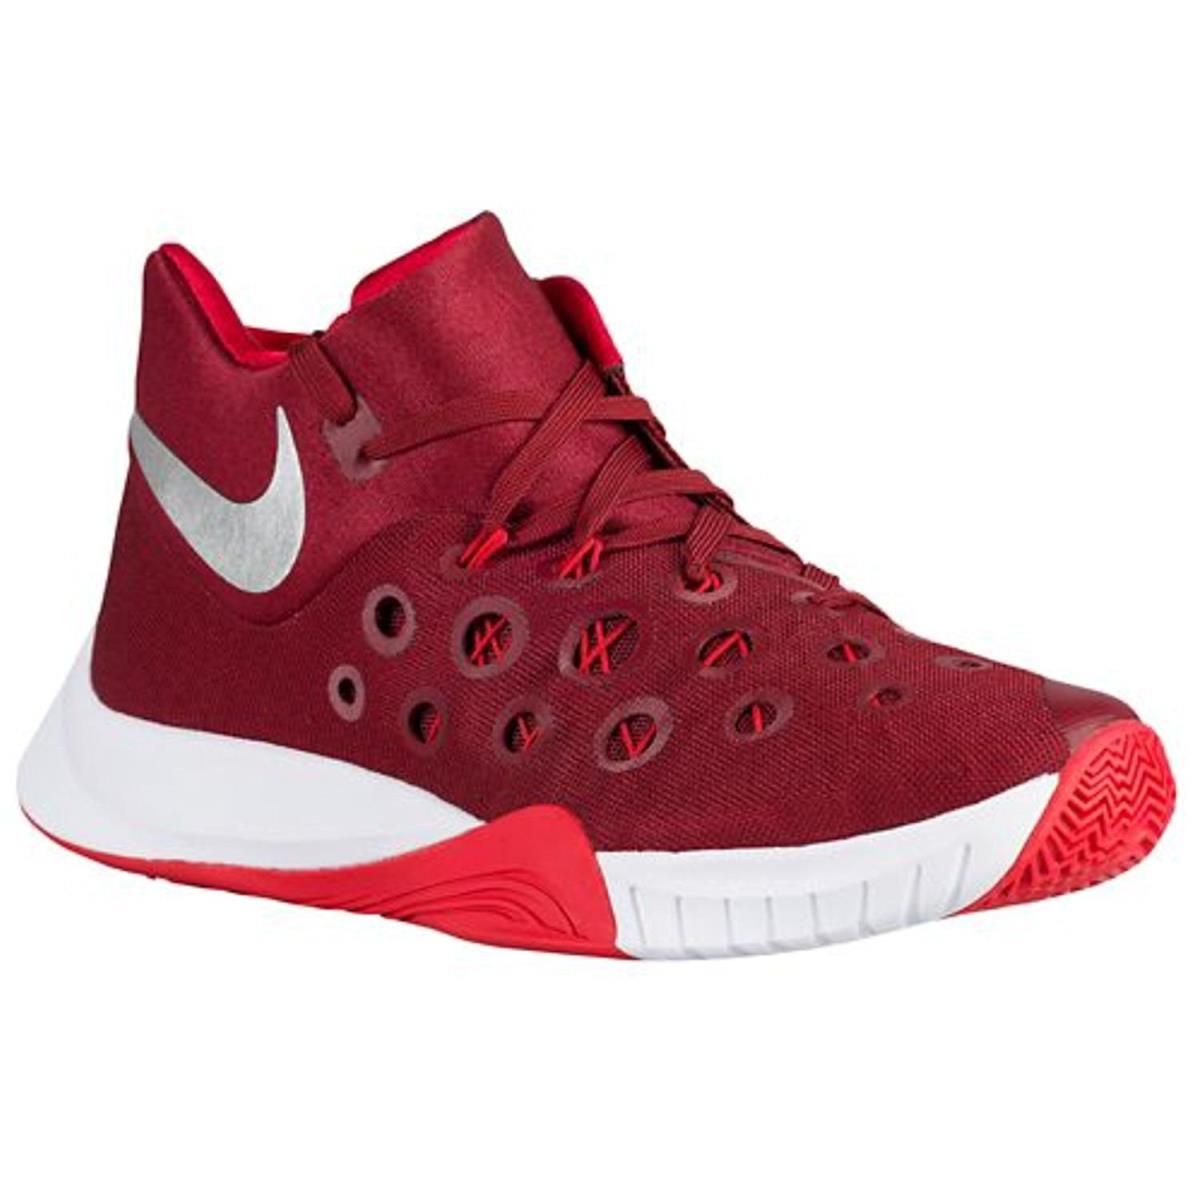 Nike Men`s Zoom Hyperquickness 2015 Basketball Shoes Team Red/Metallic Silver/University Red